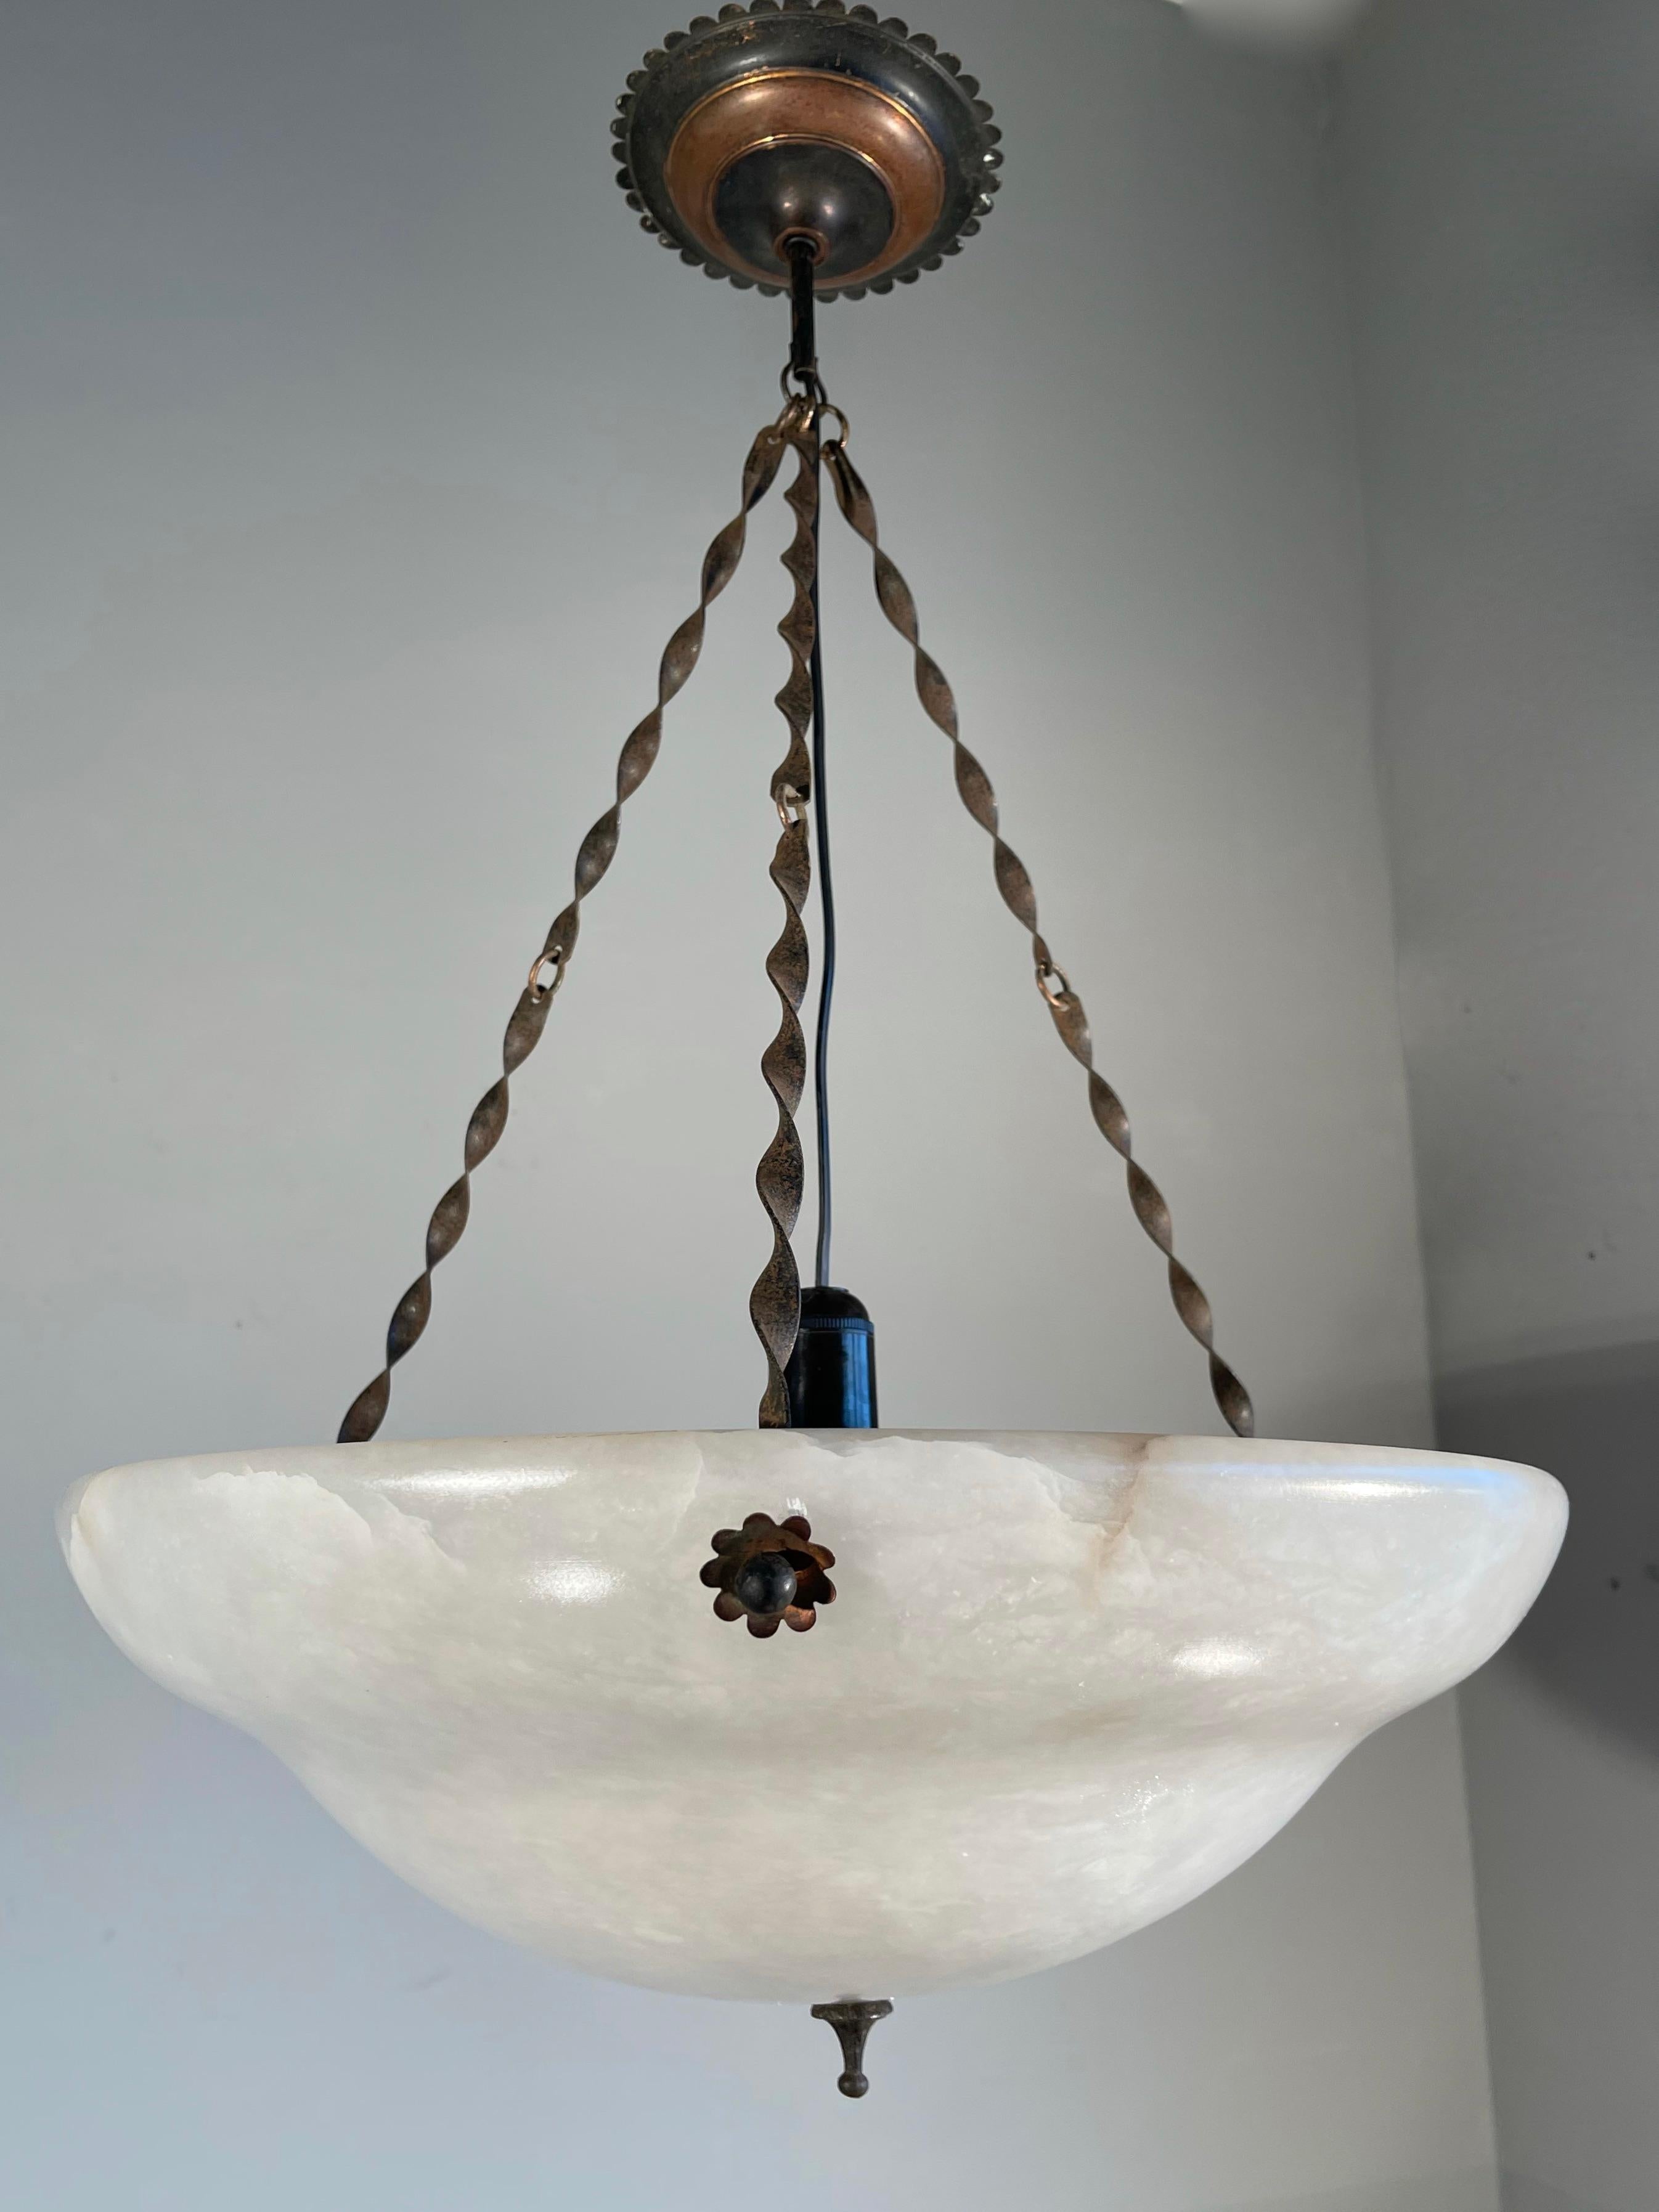 Vintage and top condition large white mineral stone ceiling fixture.

For the private buyers and interior designers we also have this large and pure white alabaster pendant. Its impressive size and unique chain of twisted brass with a remarkable